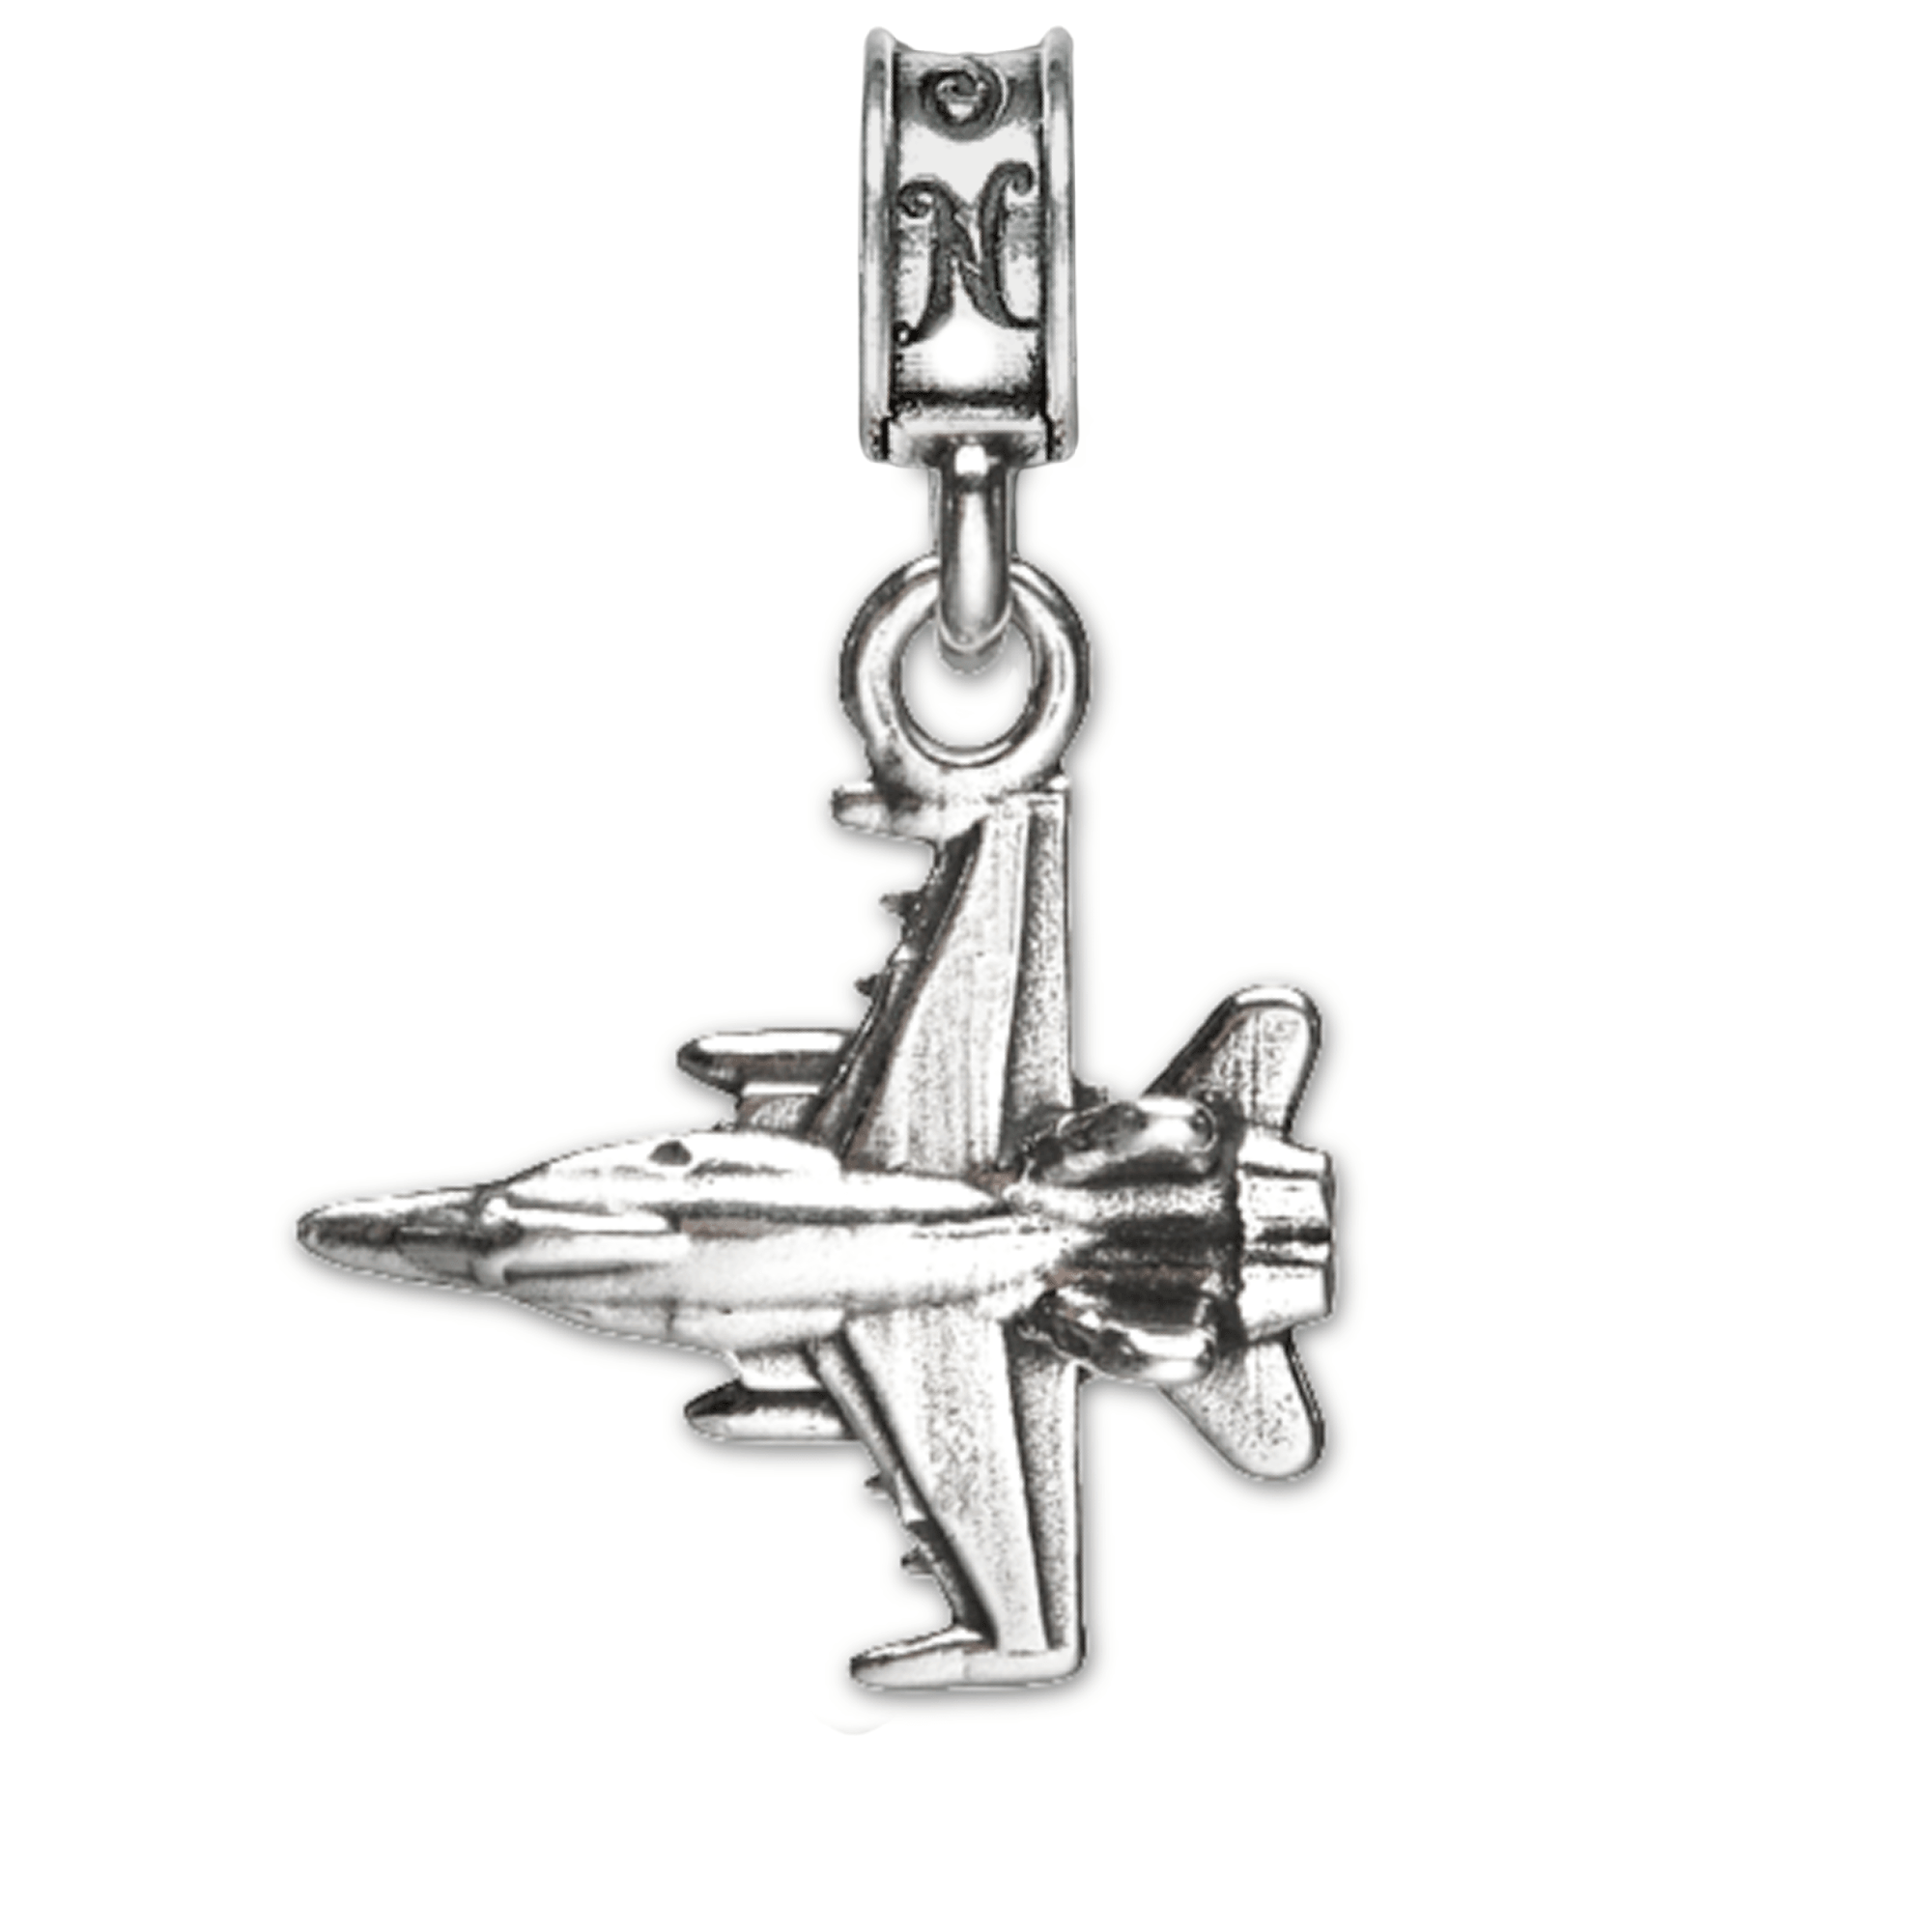 Military Jewelry, Military Charms, Military Gifts, Military Aviation, F-18